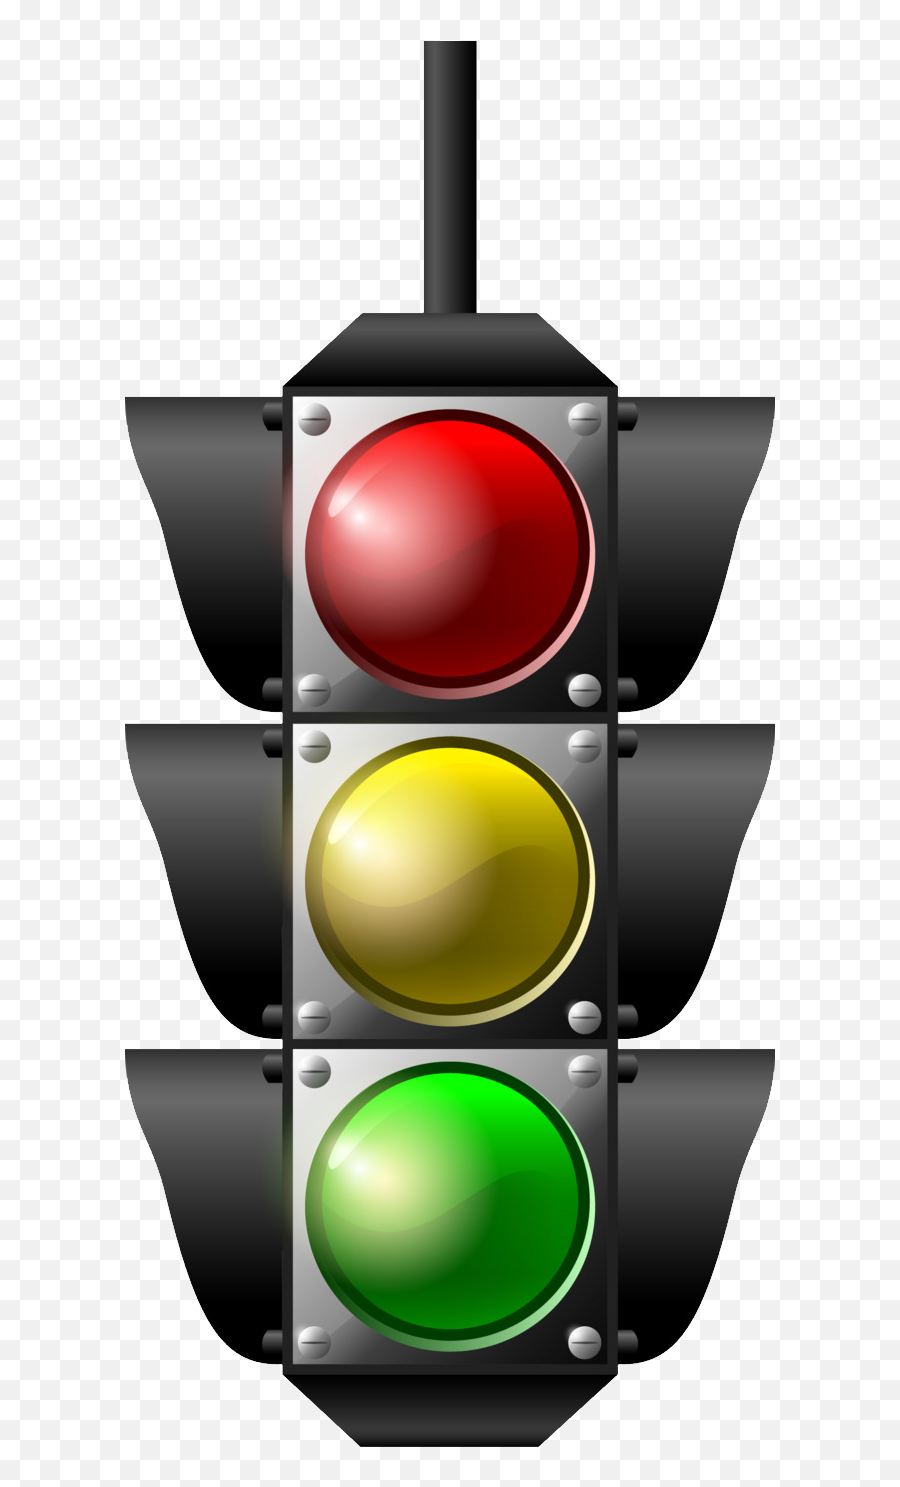 Traffic Light Png - Traffic Rules Images Download,Red Light Png